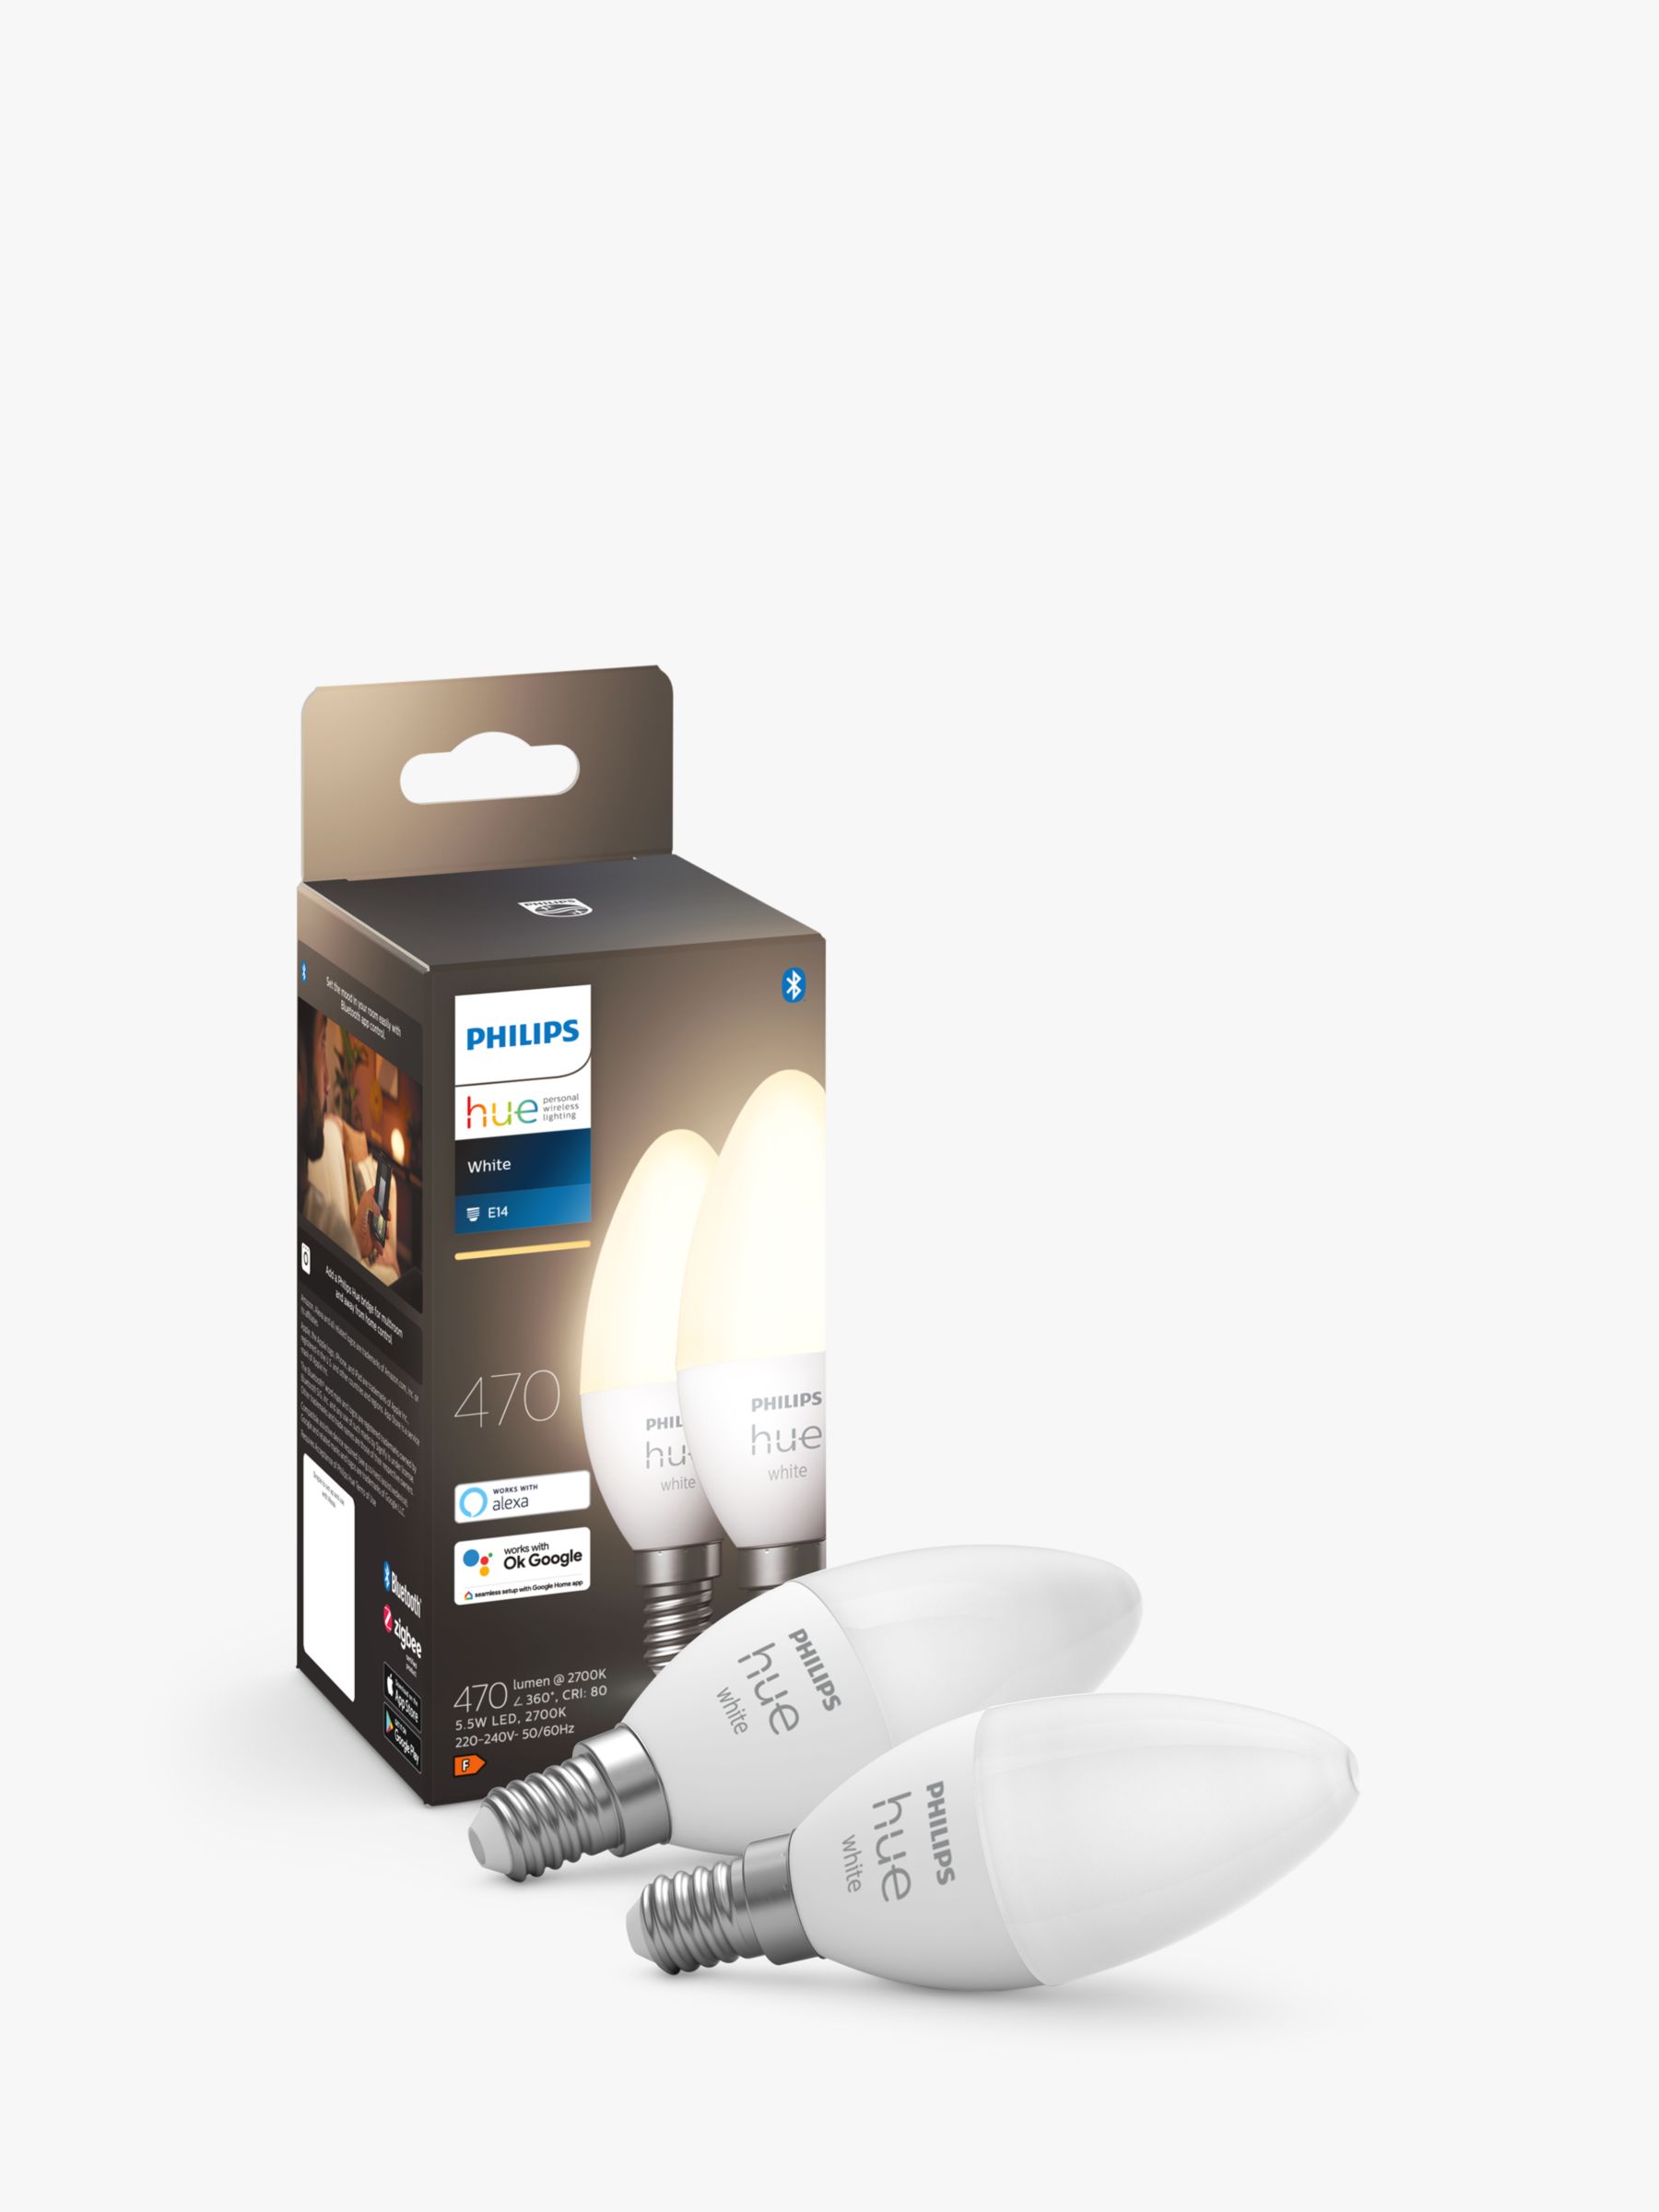 Photo of Philips hue white wireless lighting led light bulb with bluetooth 5.5w b39 e14 small edison screw bulb pack of 2